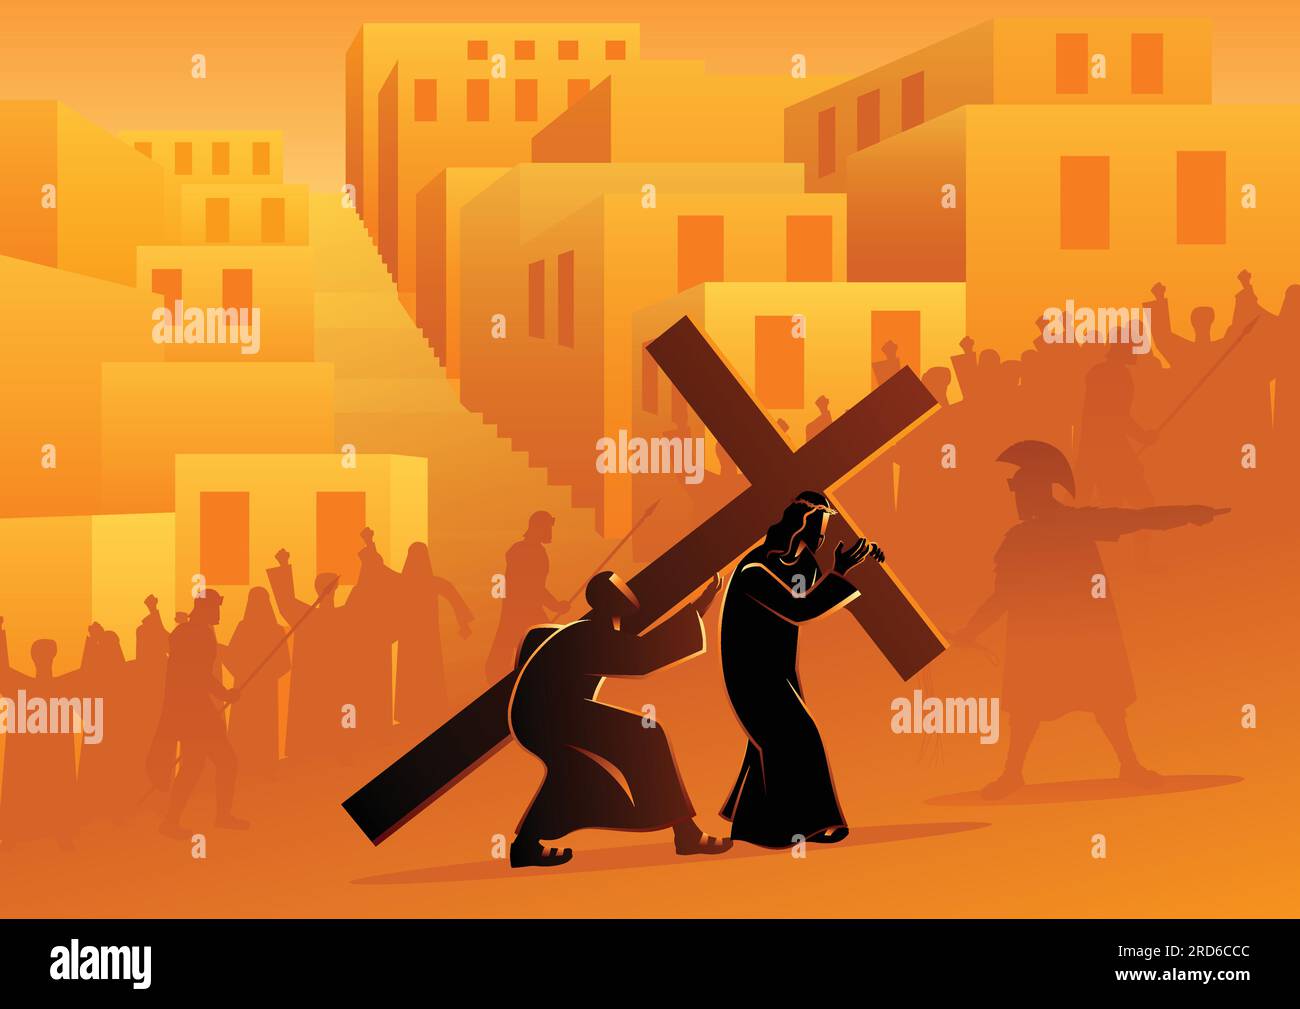 Biblical vector illustration series. Way of the Cross or Stations of the Cross, fifth station, Simon of Cyrene helps Jesus carry his cross. Stock Vector